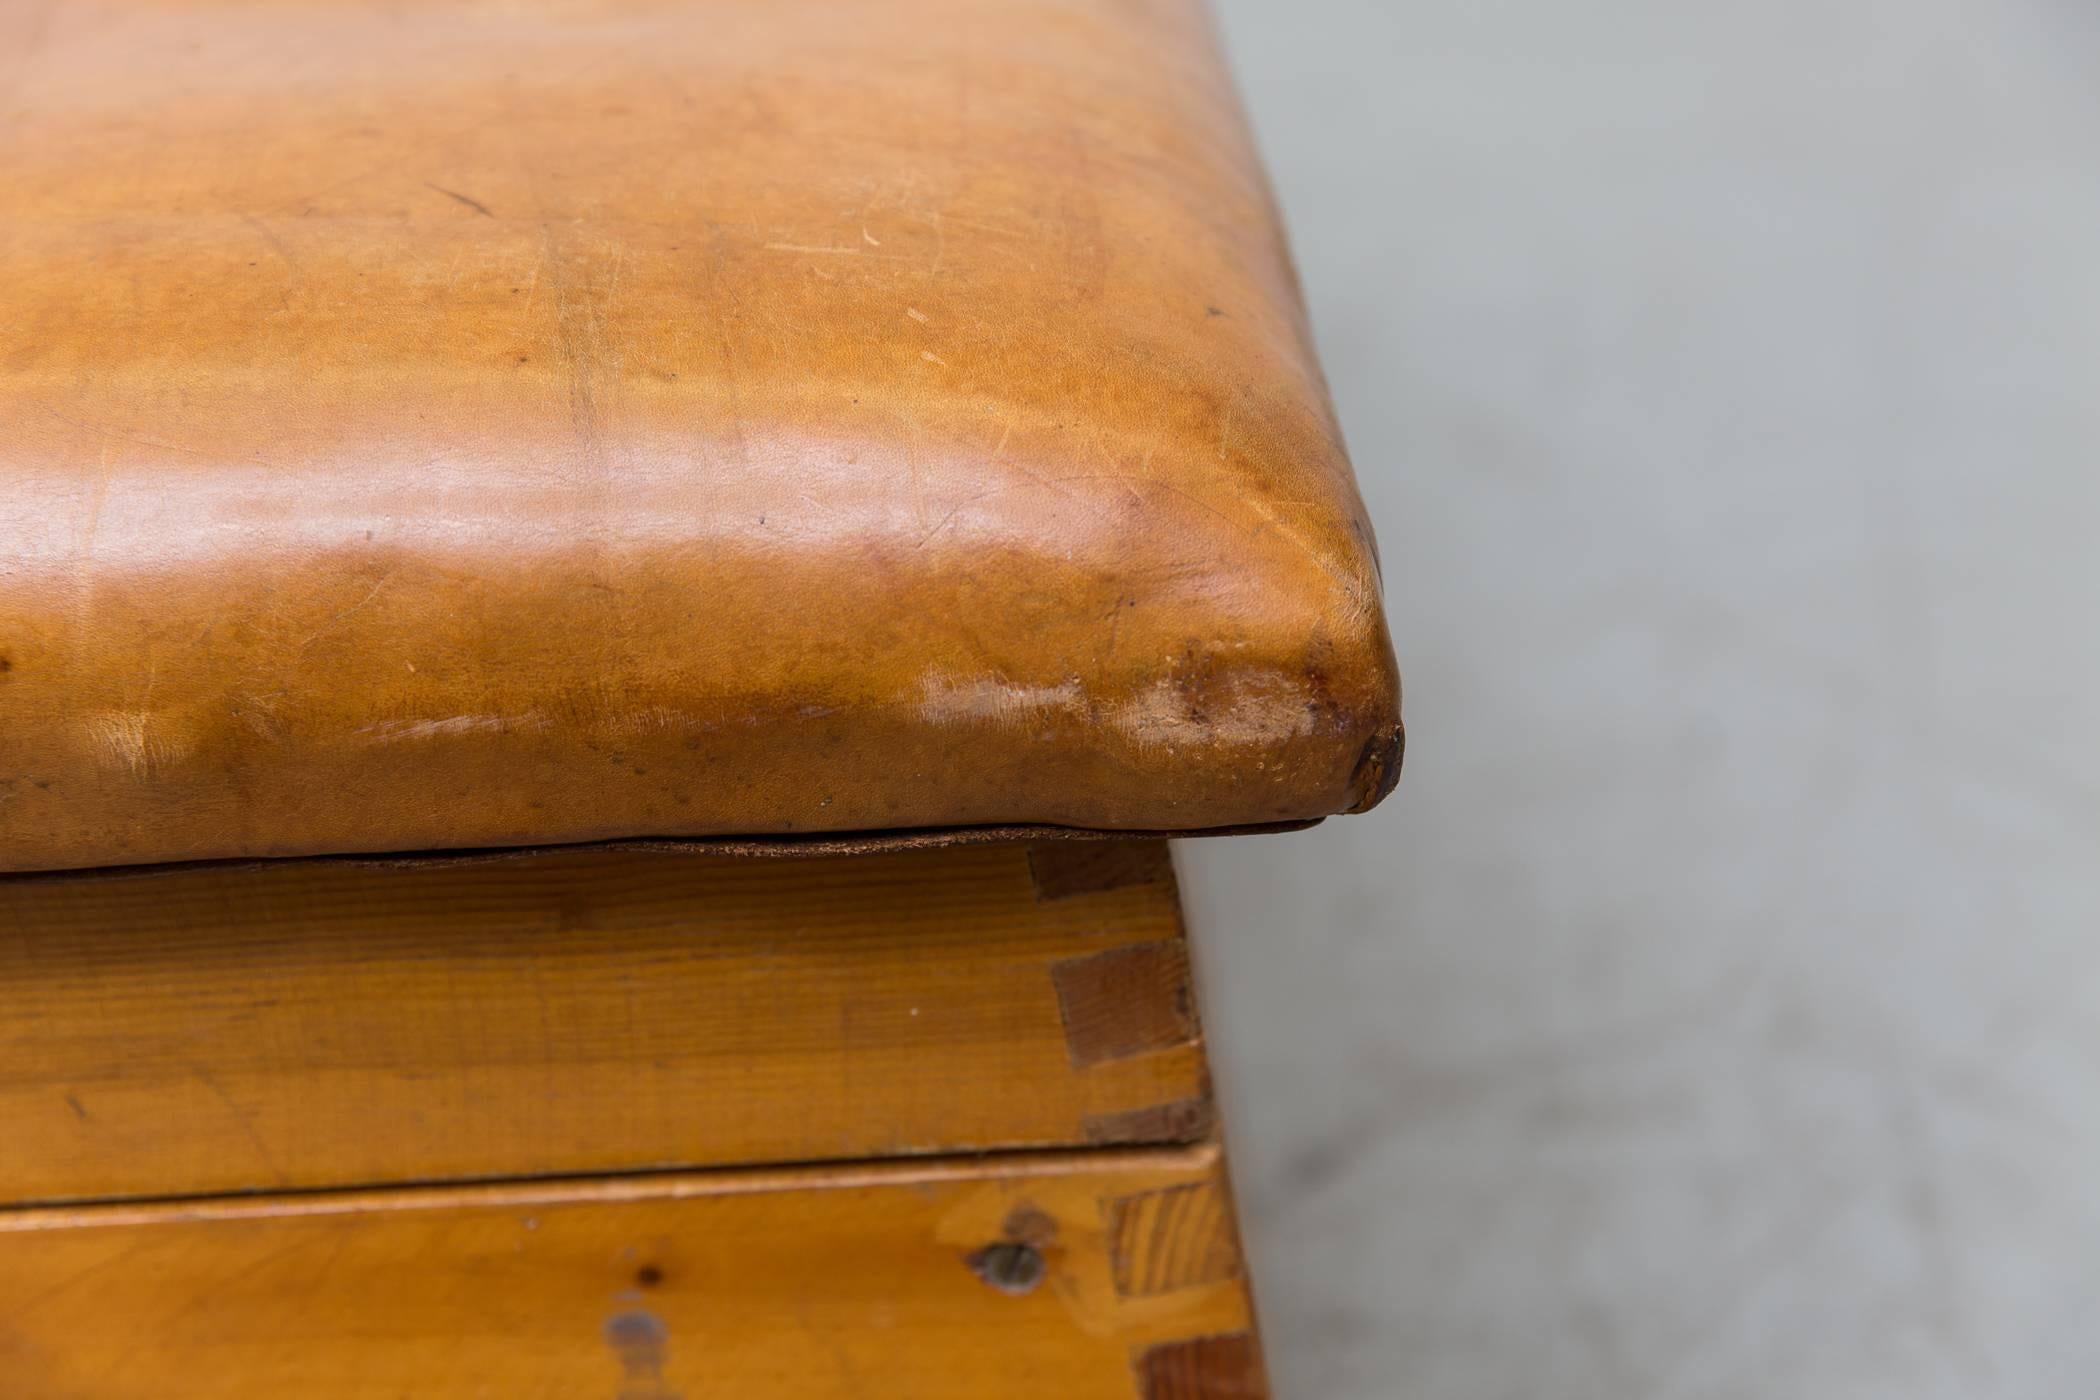 Leather Gymnastic Horse Bench or Coffee Table 2